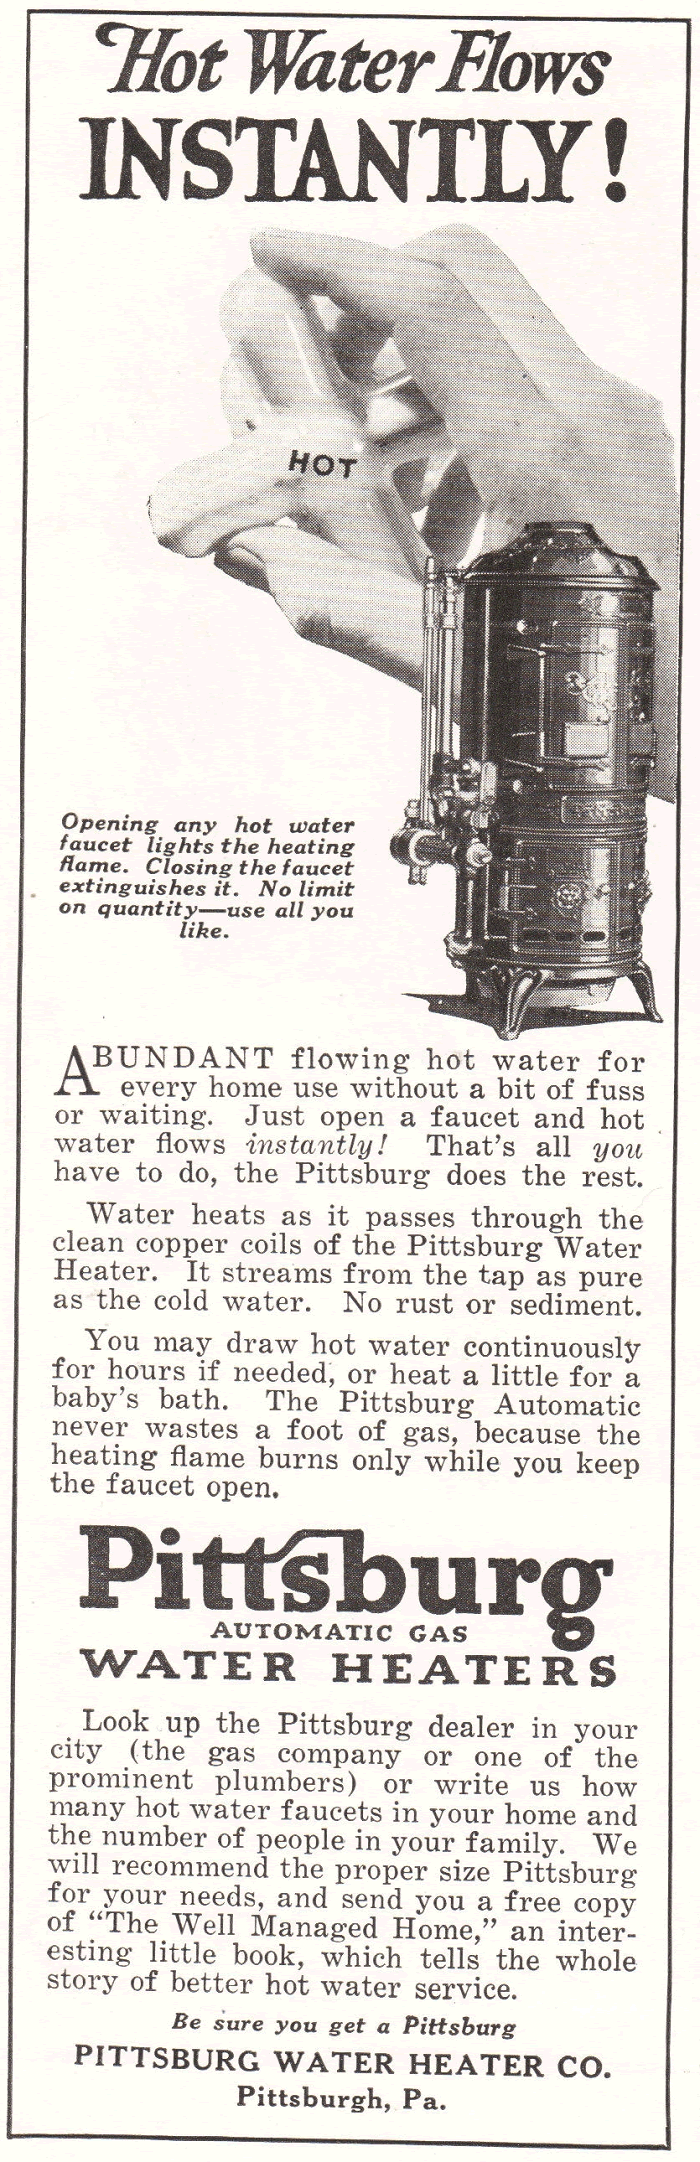 Pittsburg Automatic Gas Water Heaters - Advertisement from 1922